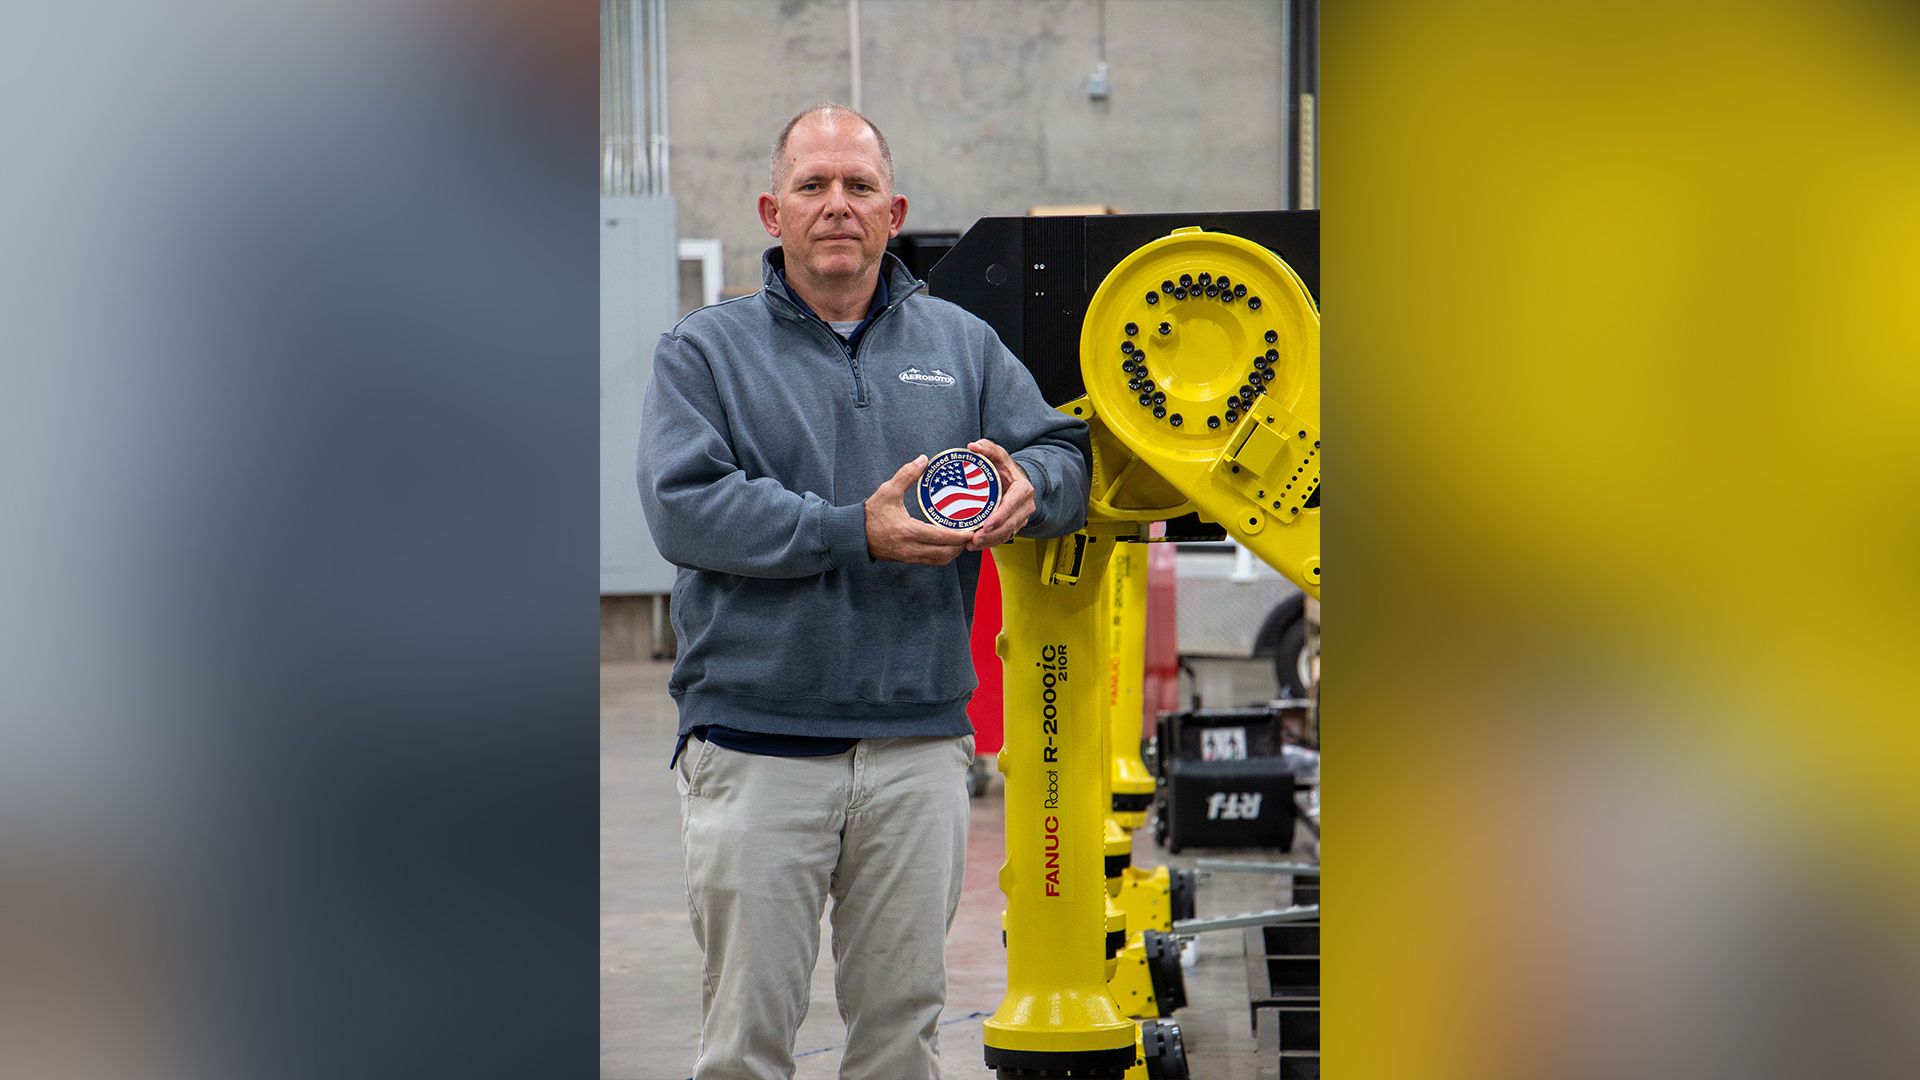 Aerobotix Senior Project Engineer Keenan Simmons holding the 2022 Lockheed Martin Supplier Recognition Award for Ease of Doing Business beside a FANUC robot.